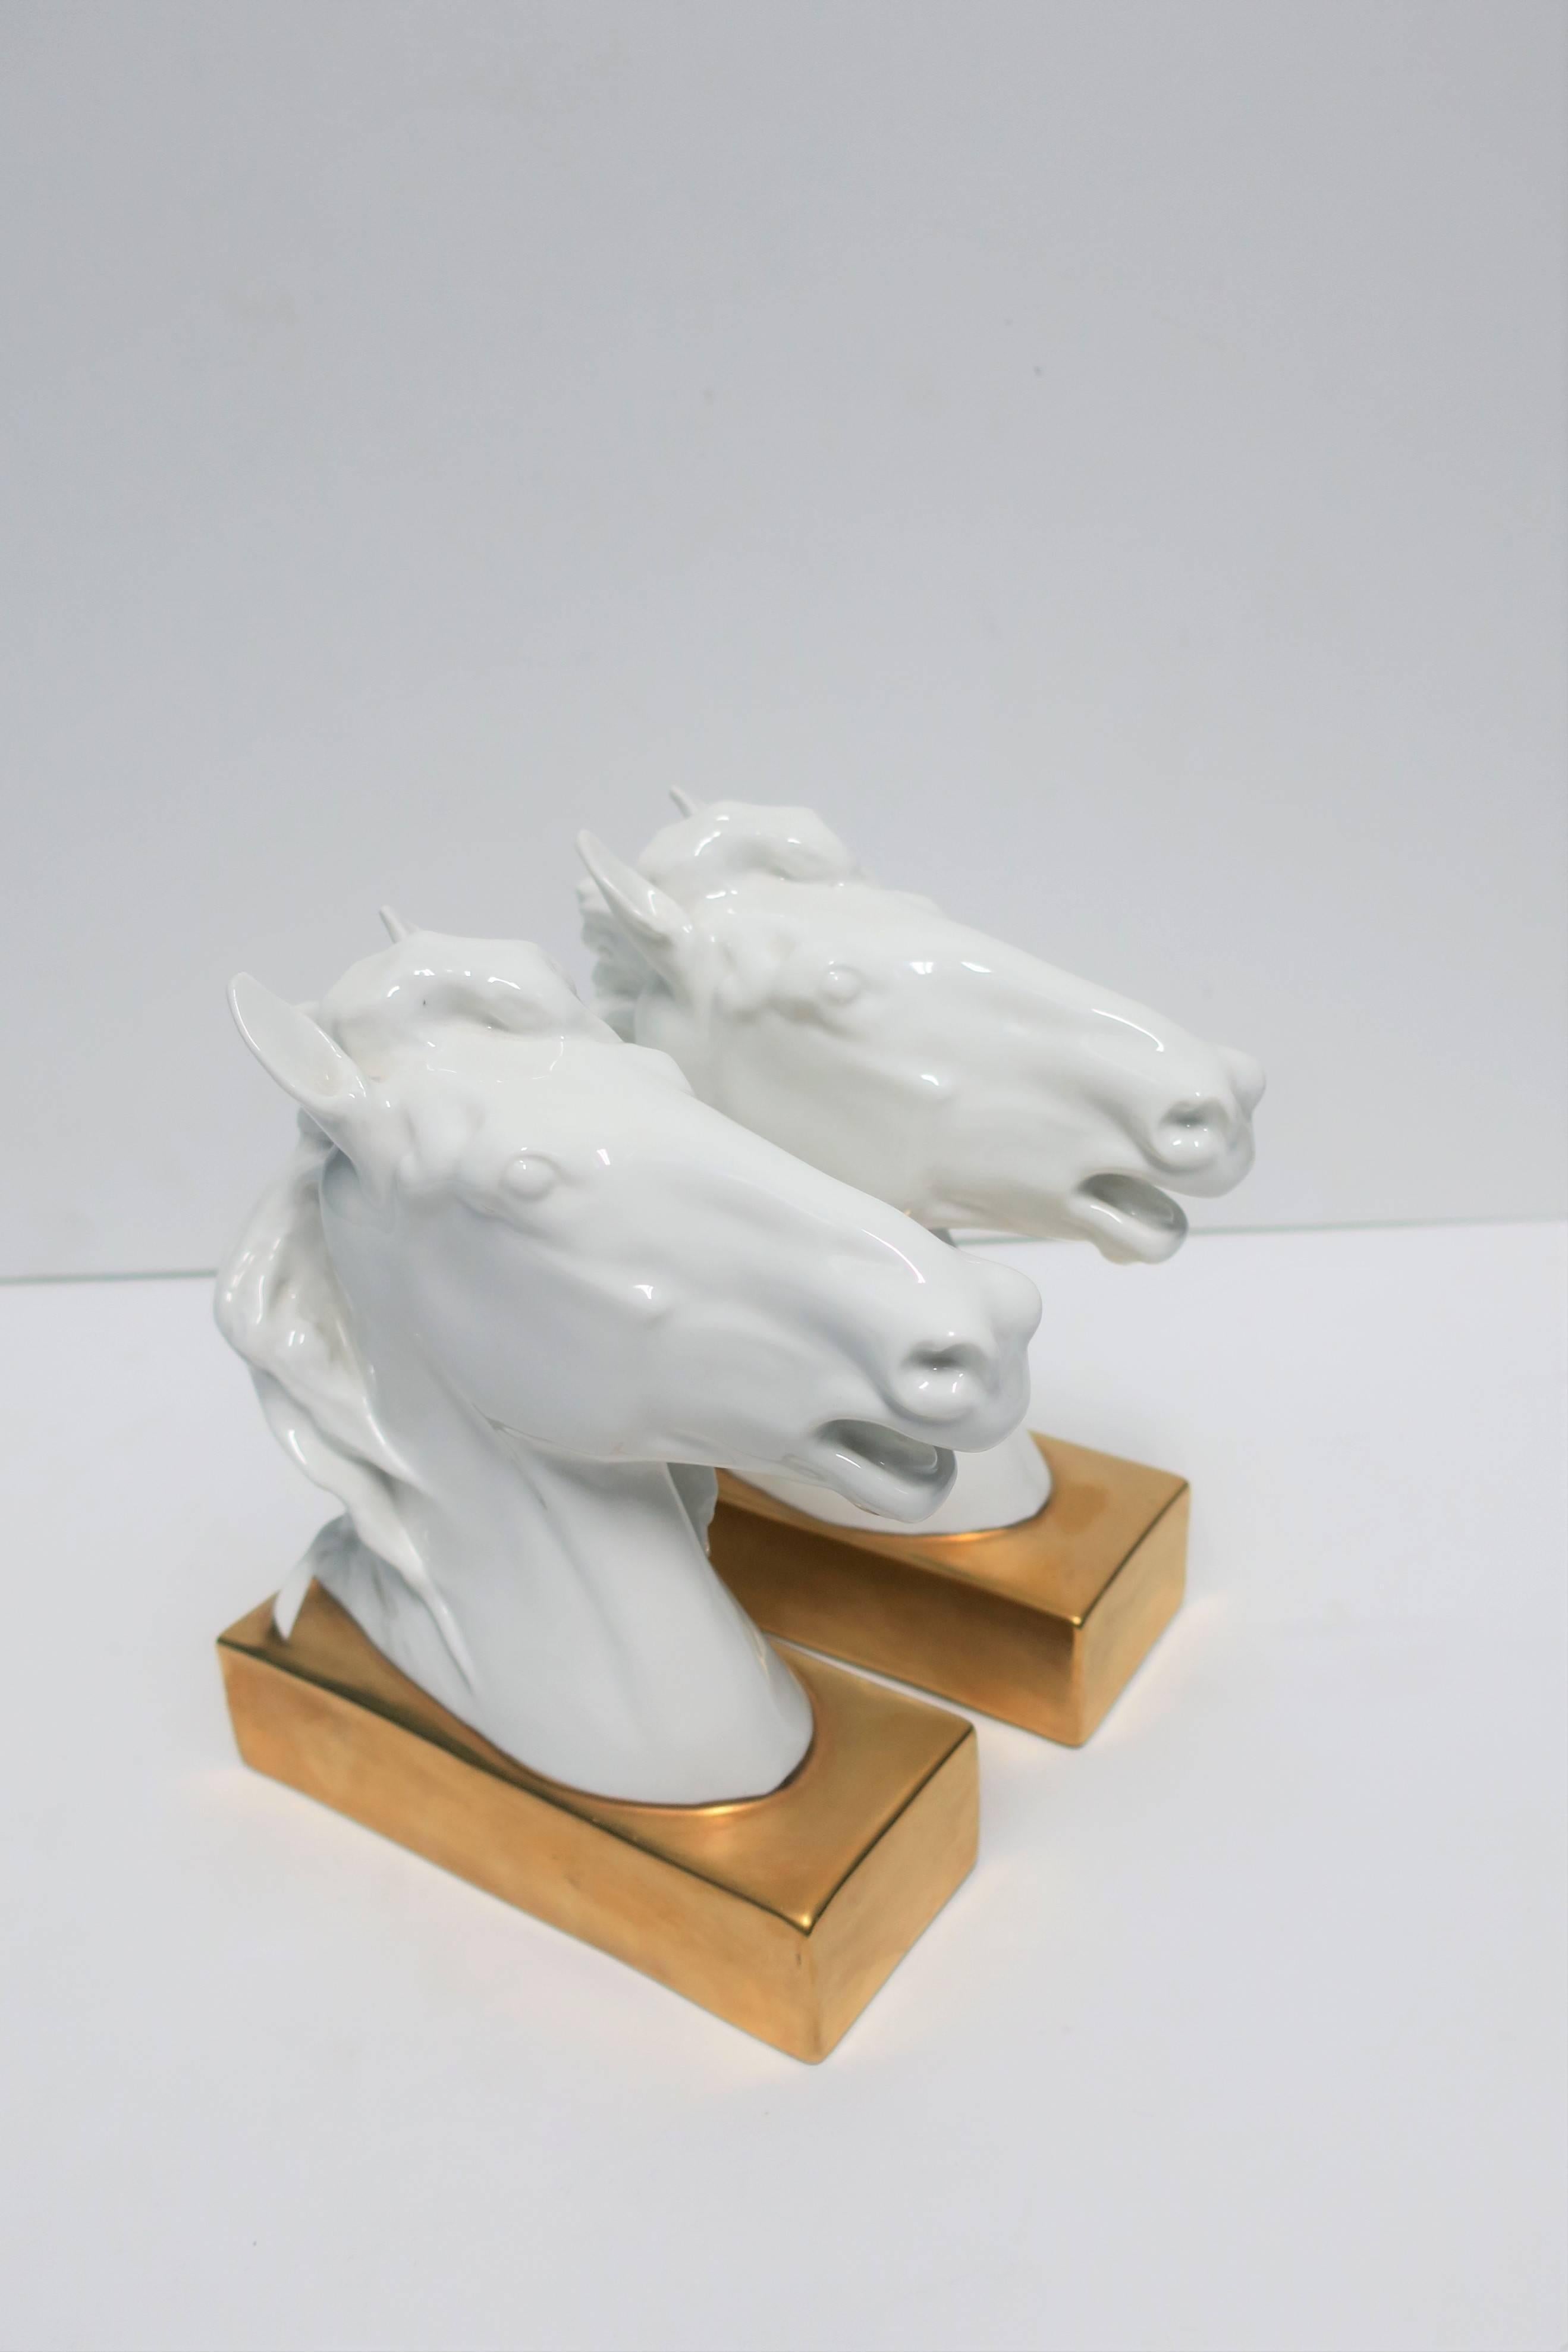 20th Century Porcelain Horse Equine Bookends or Decorative Object Sculptures European For Sale